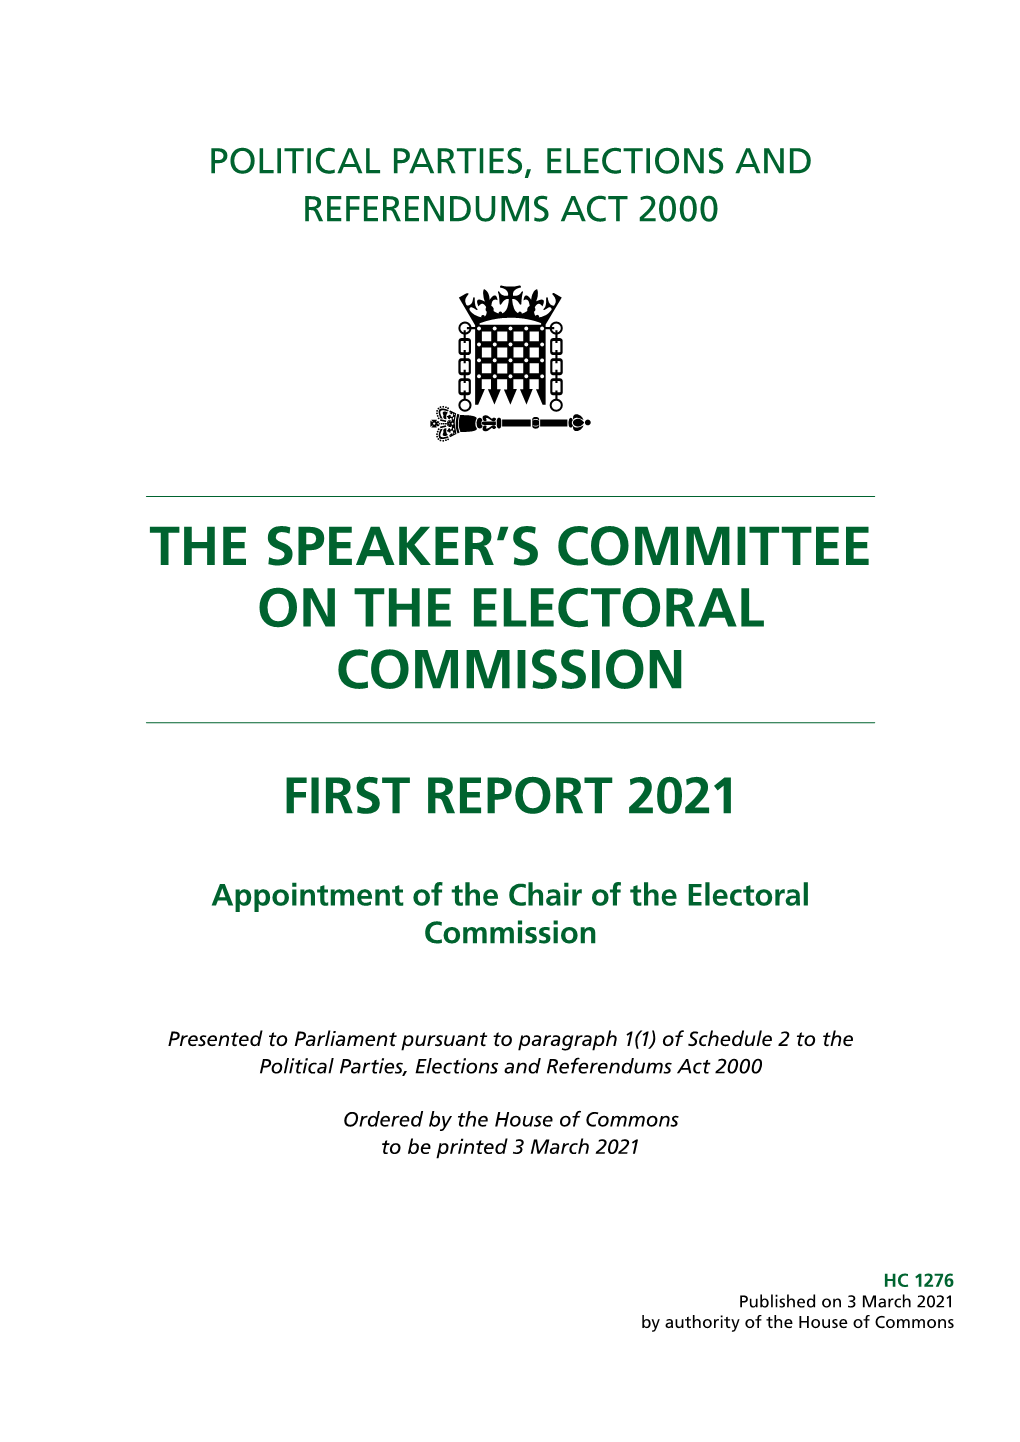 Appointment of the Chair of the Electoral Commission